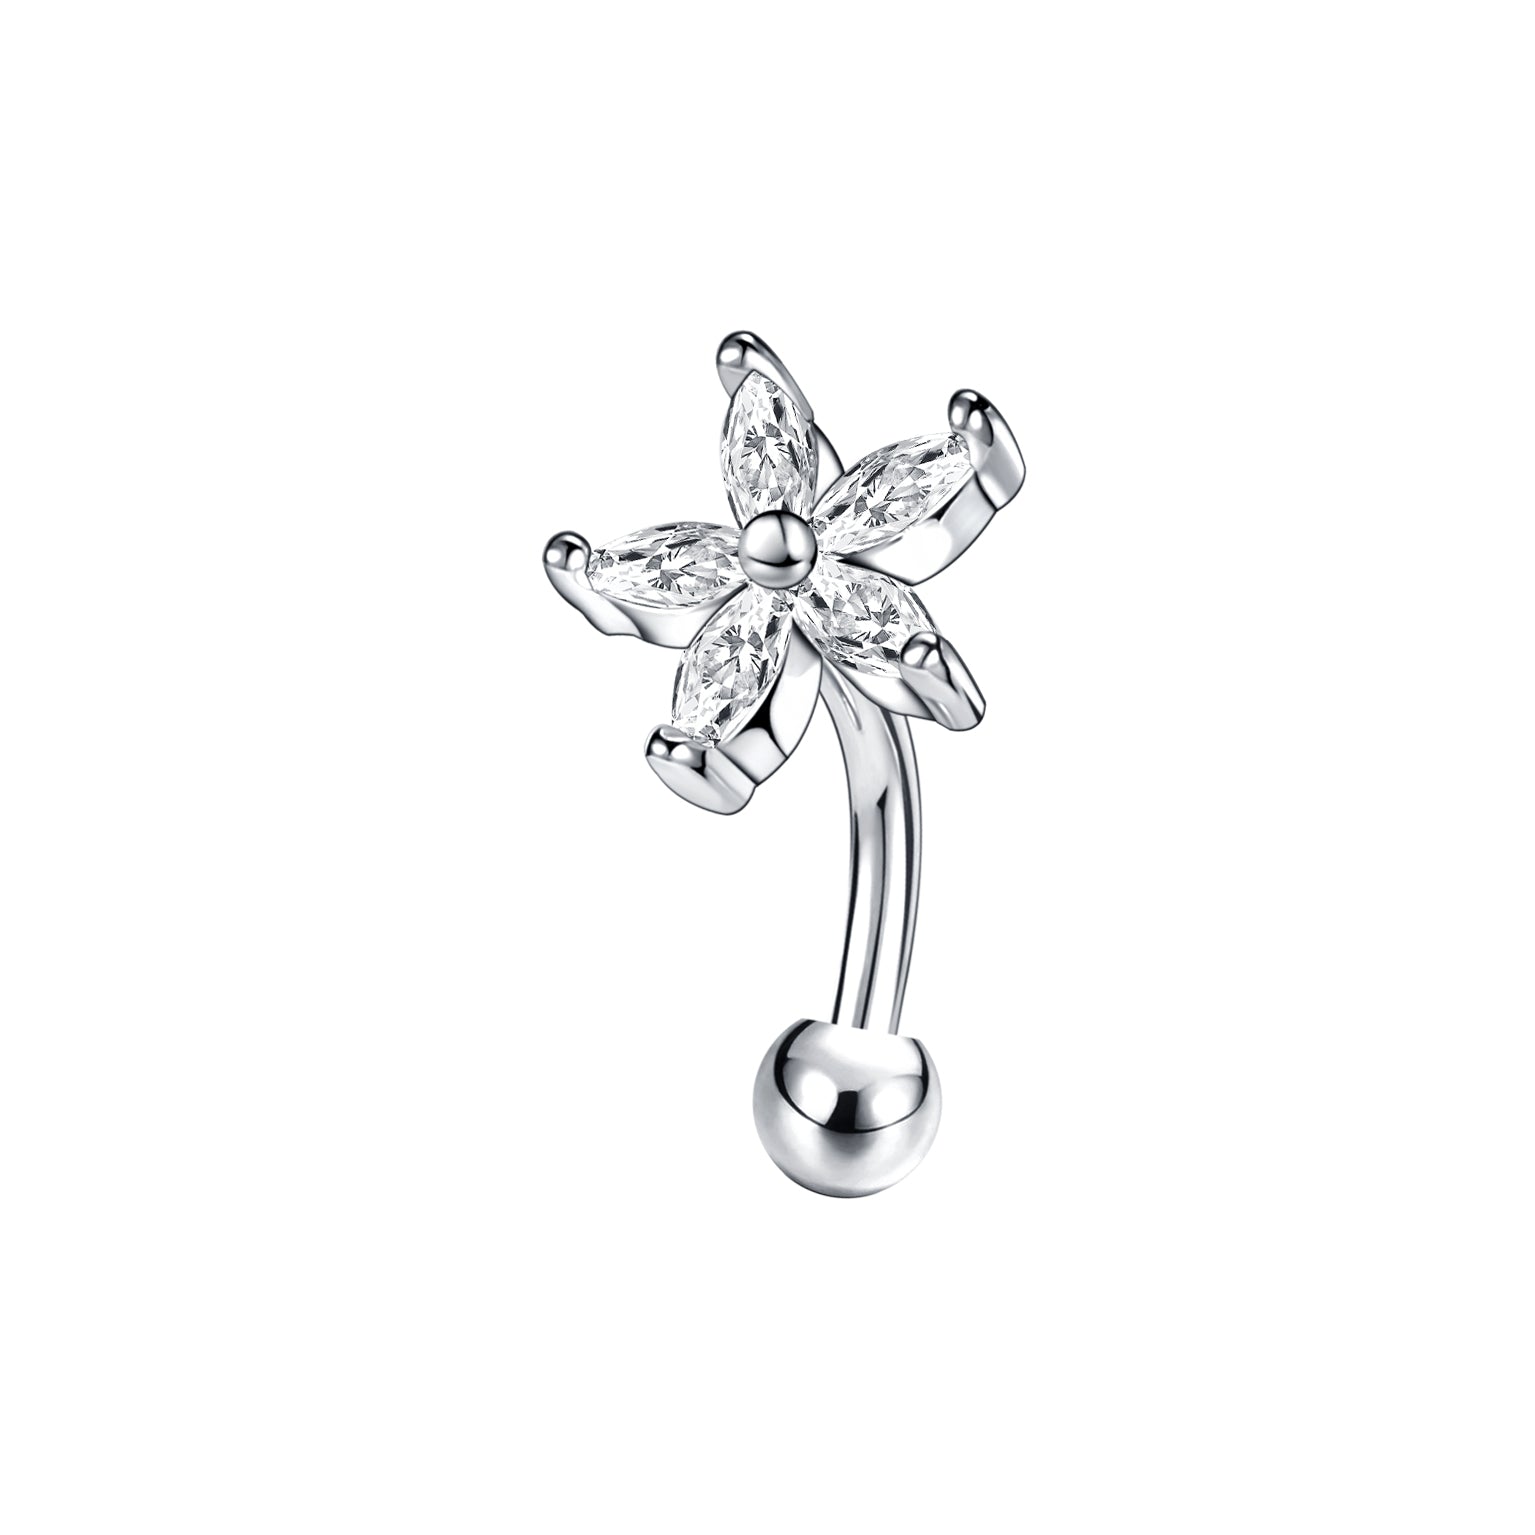 16g CZ Flower Eyebrow Ring Piercing Barbell Curved Rook Helix Daith Piercing